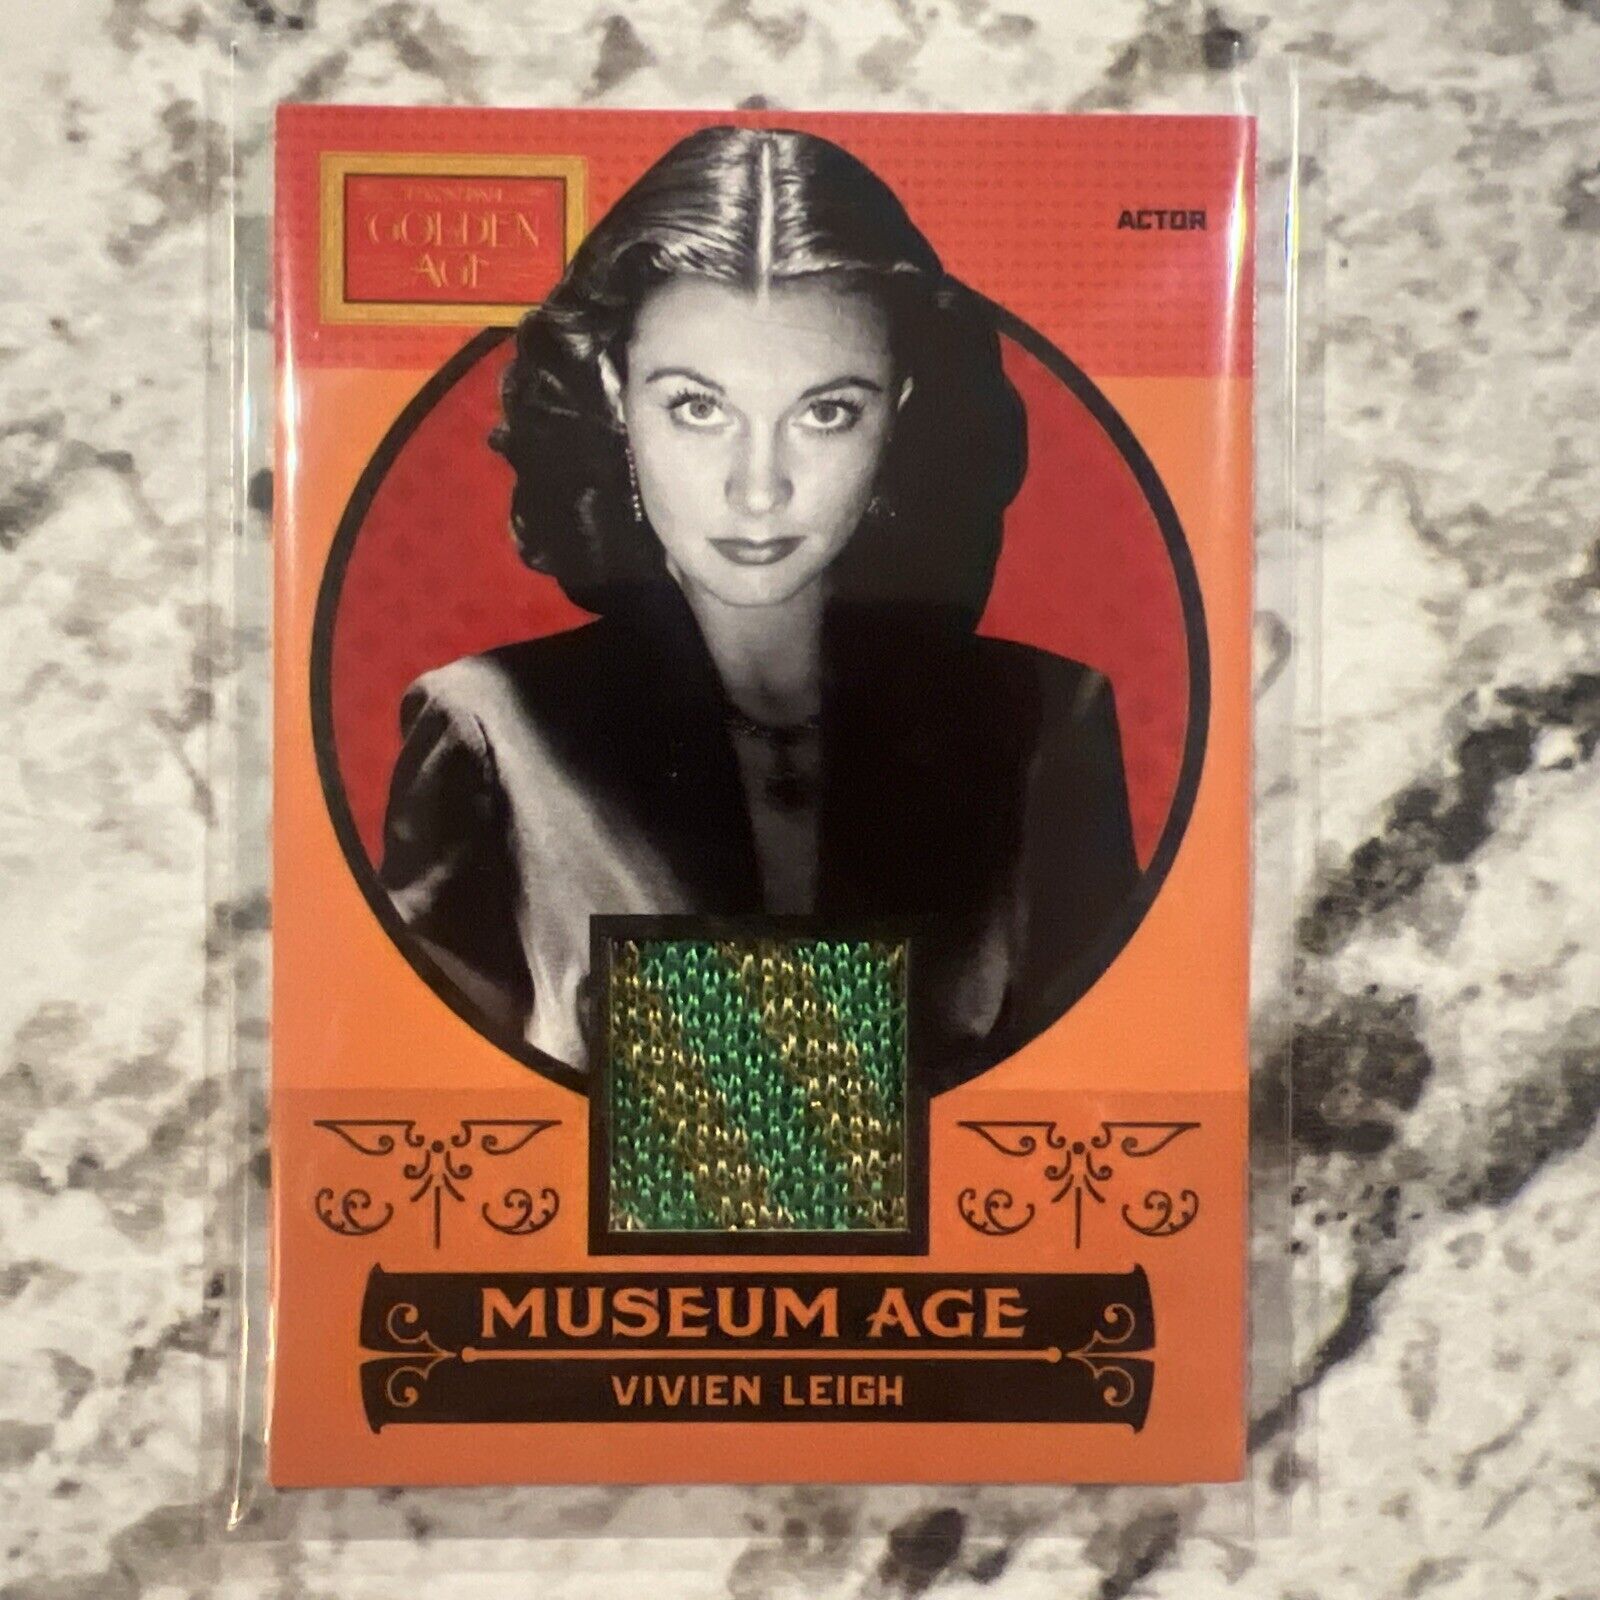 2014 Panini Golden Age Vivien Leigh Museum Age Collection Relic #1